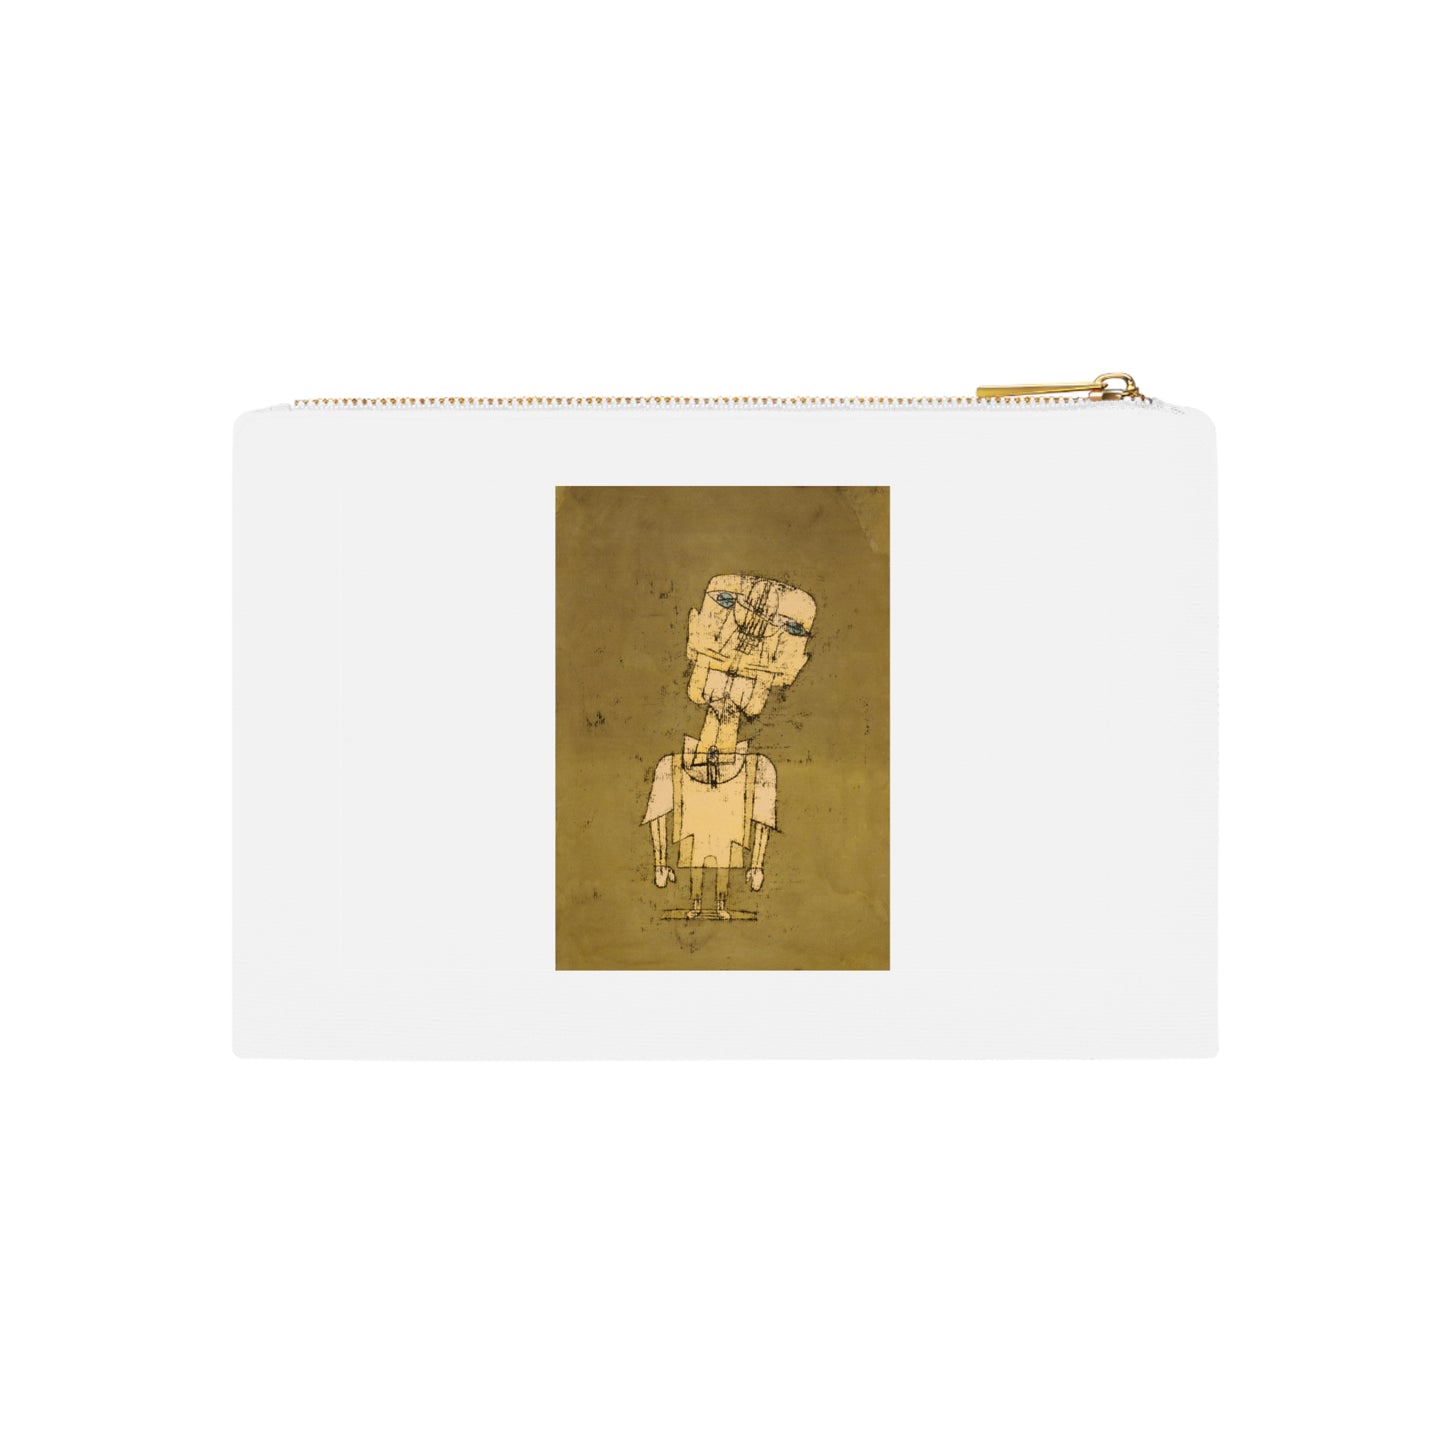 PAUL KLEE - GHOST OF A GENIUS - COTTON CANVAS COSMETIC BAG TRAVEL ORGANIZER